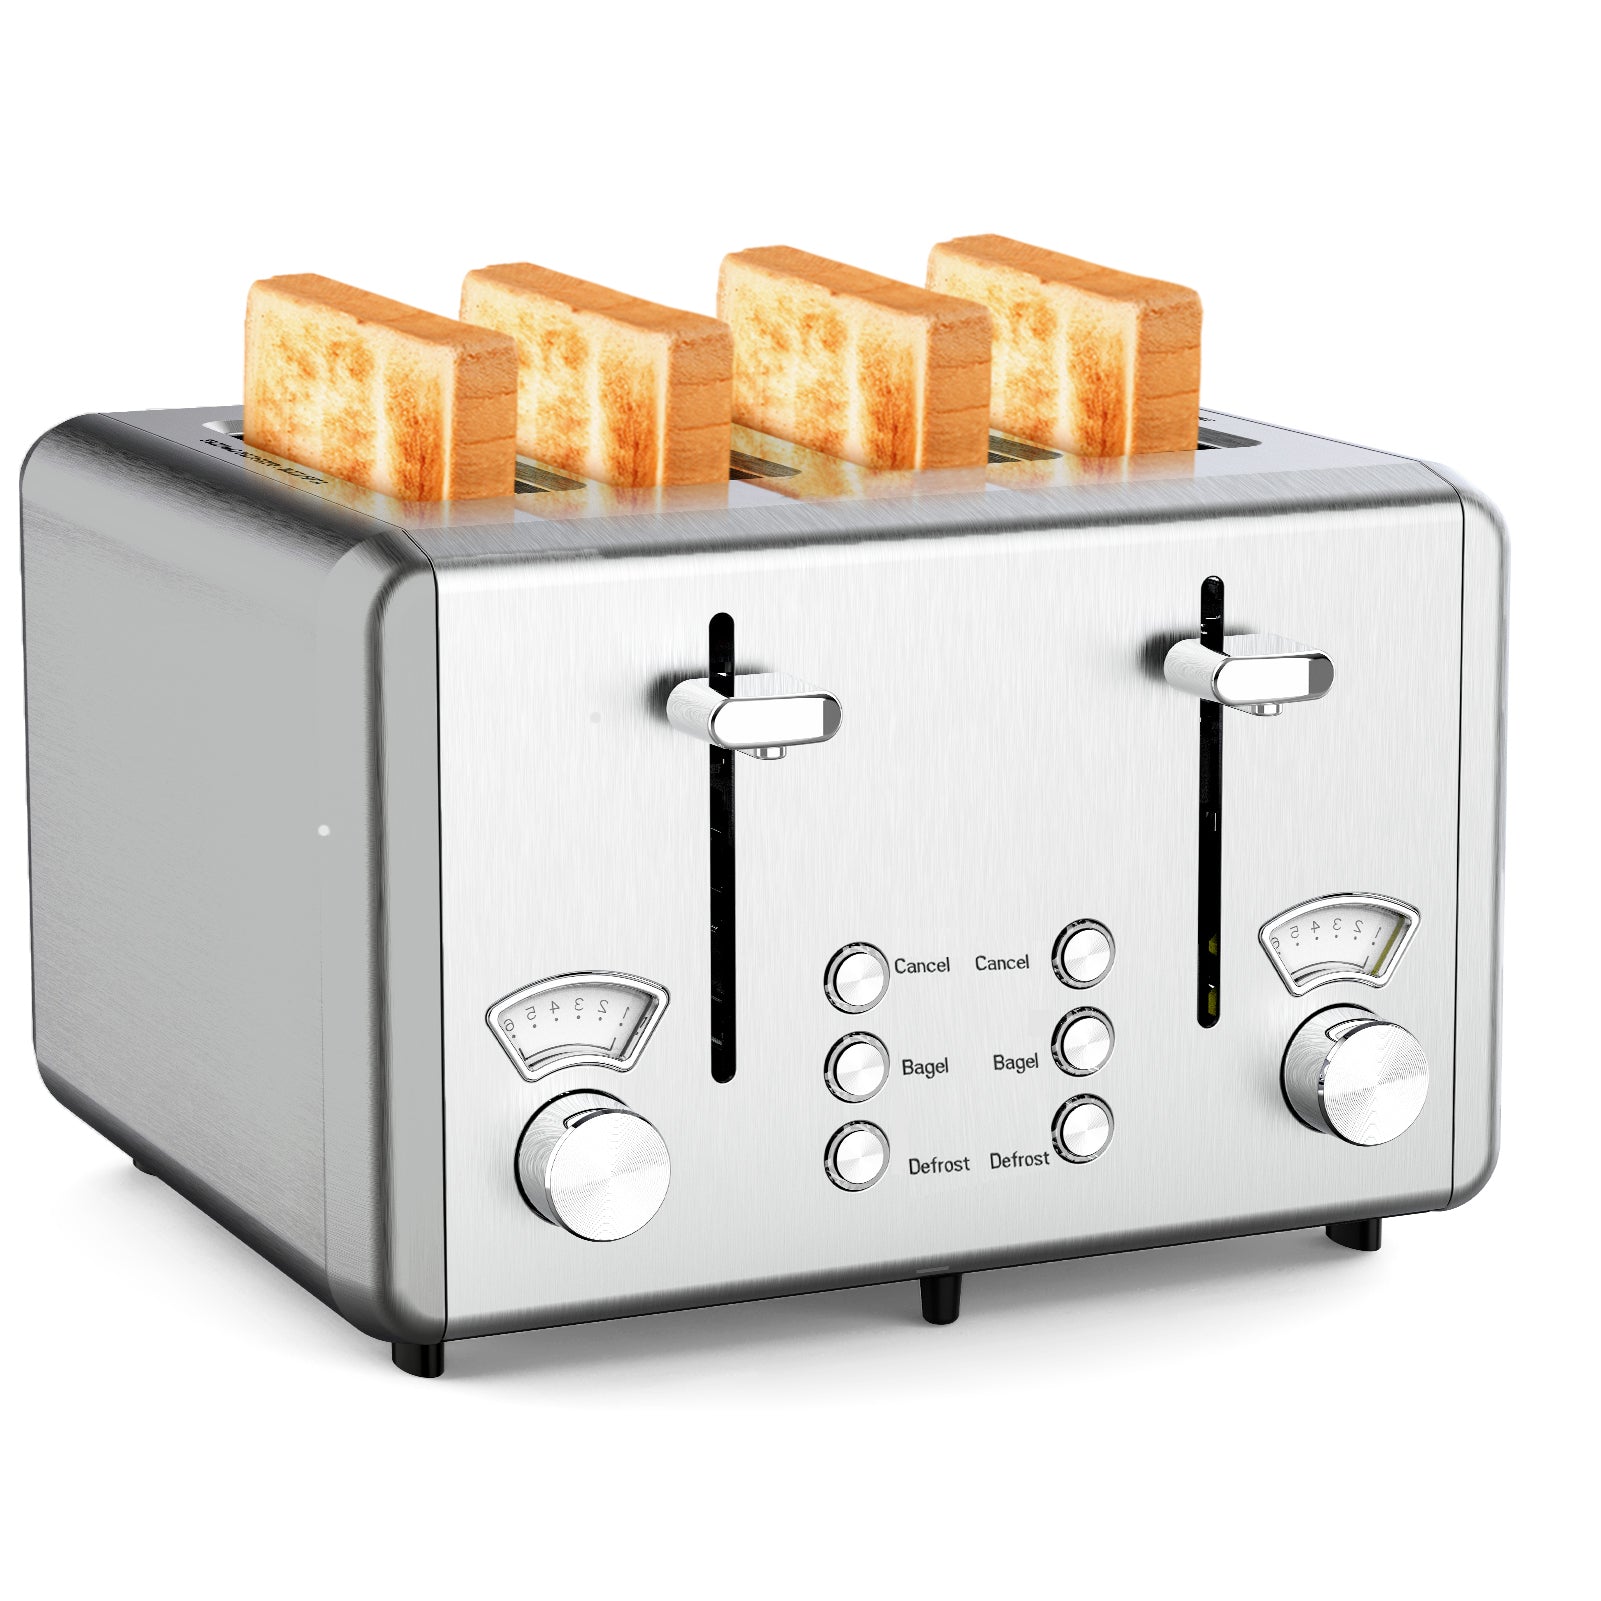 WHALL ®KST023GU Toaster Stainless Steel,Toaster-6 Bread Shade Settings,Bagel/Defrost/Cancel Function with Dual Control Panels,Wide Slot,Removable Crumb Tray